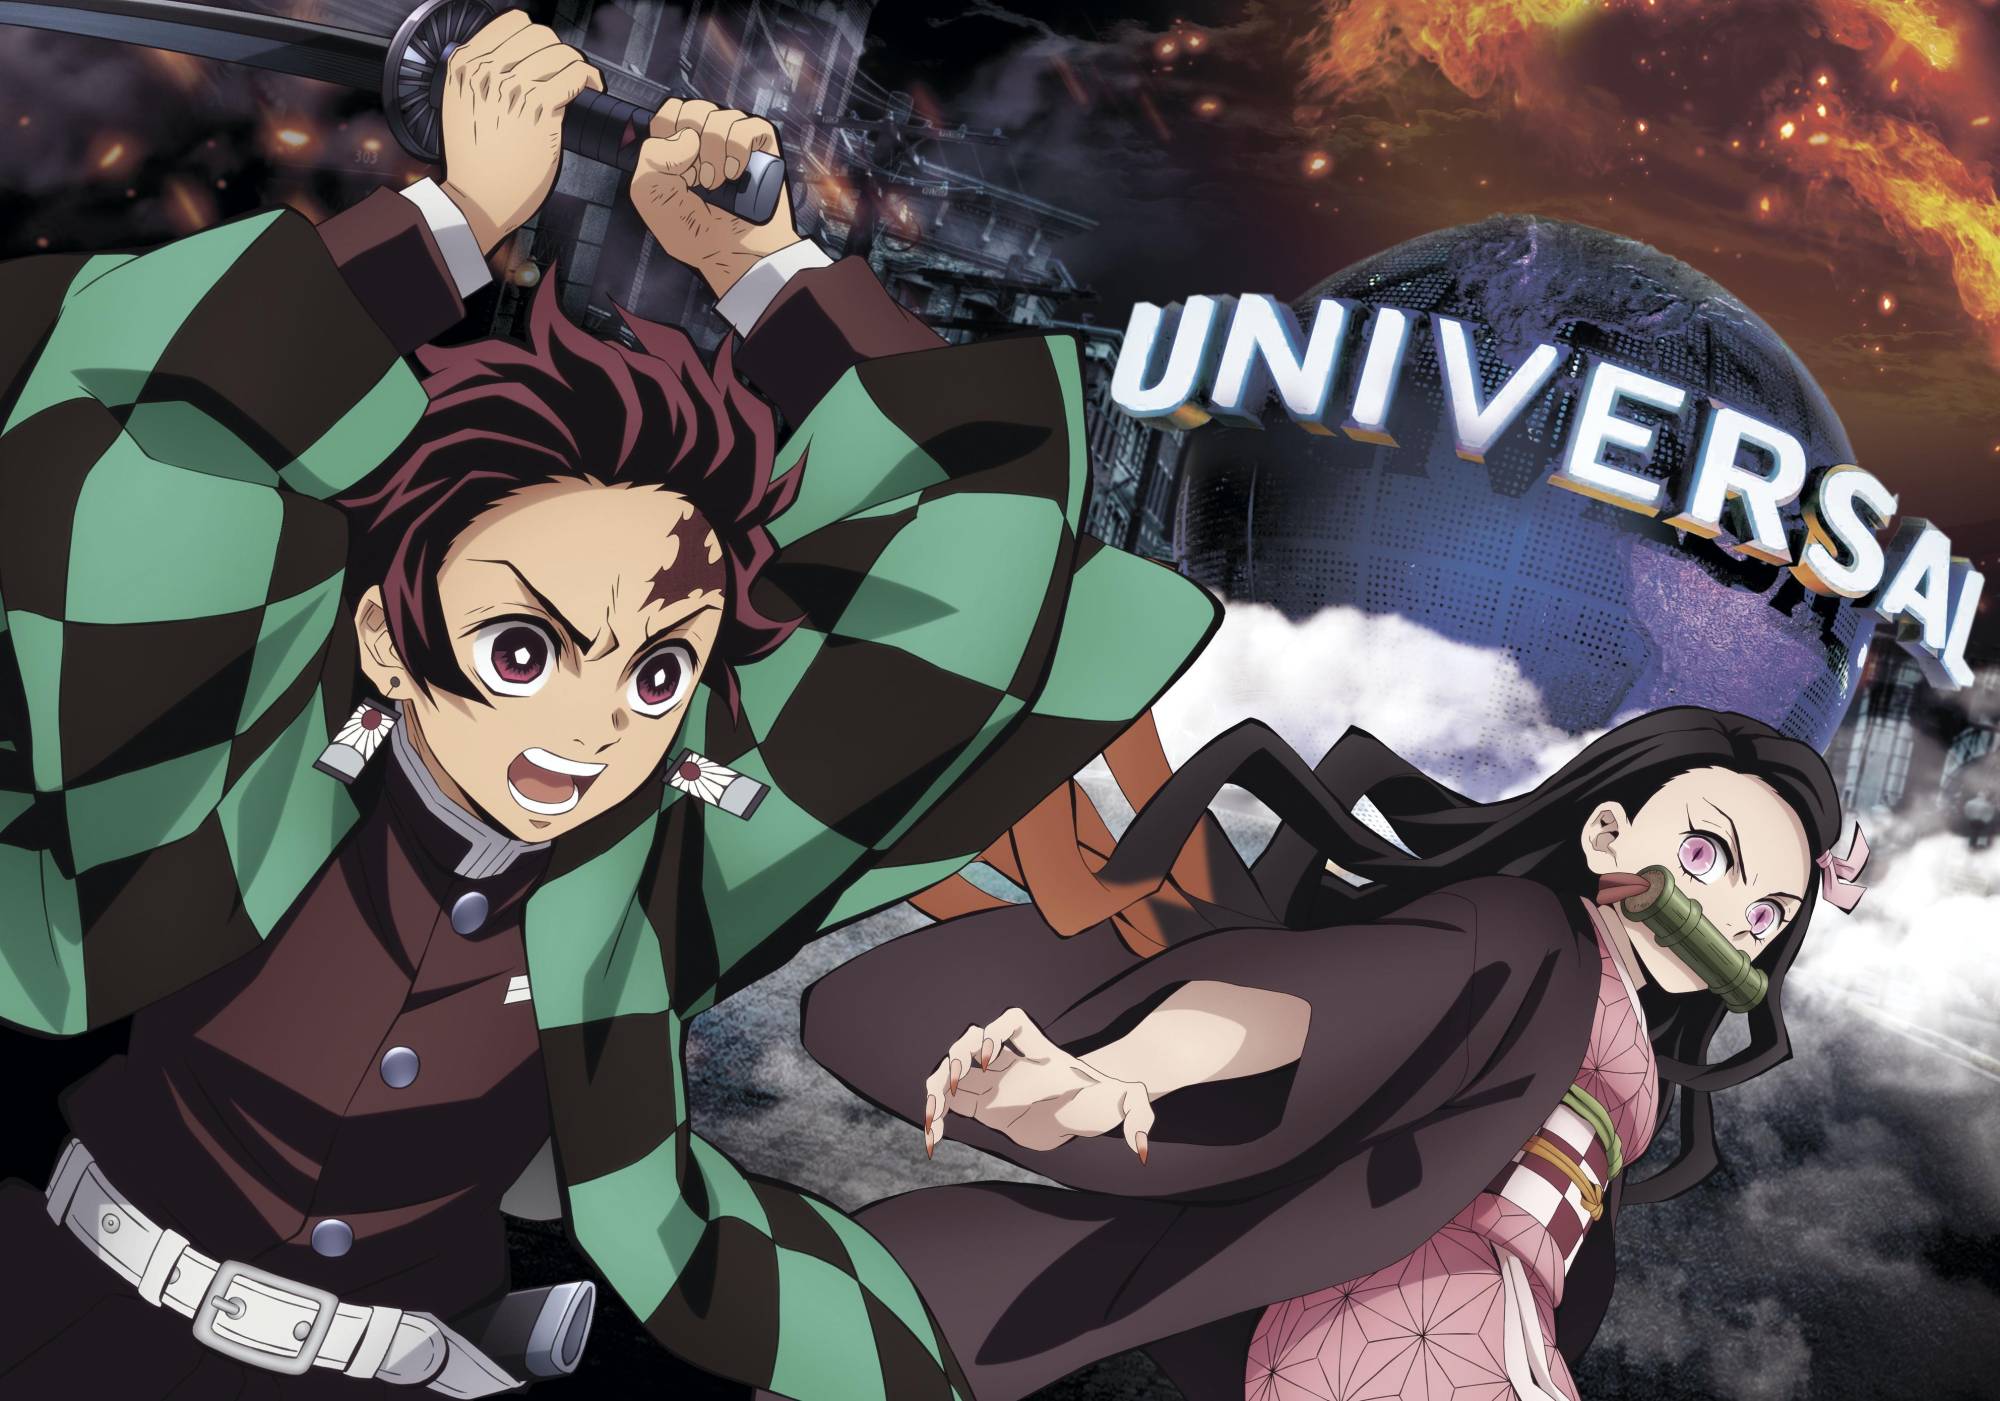 Demon Slayer' attraction to open at Universal Studios Japan - The